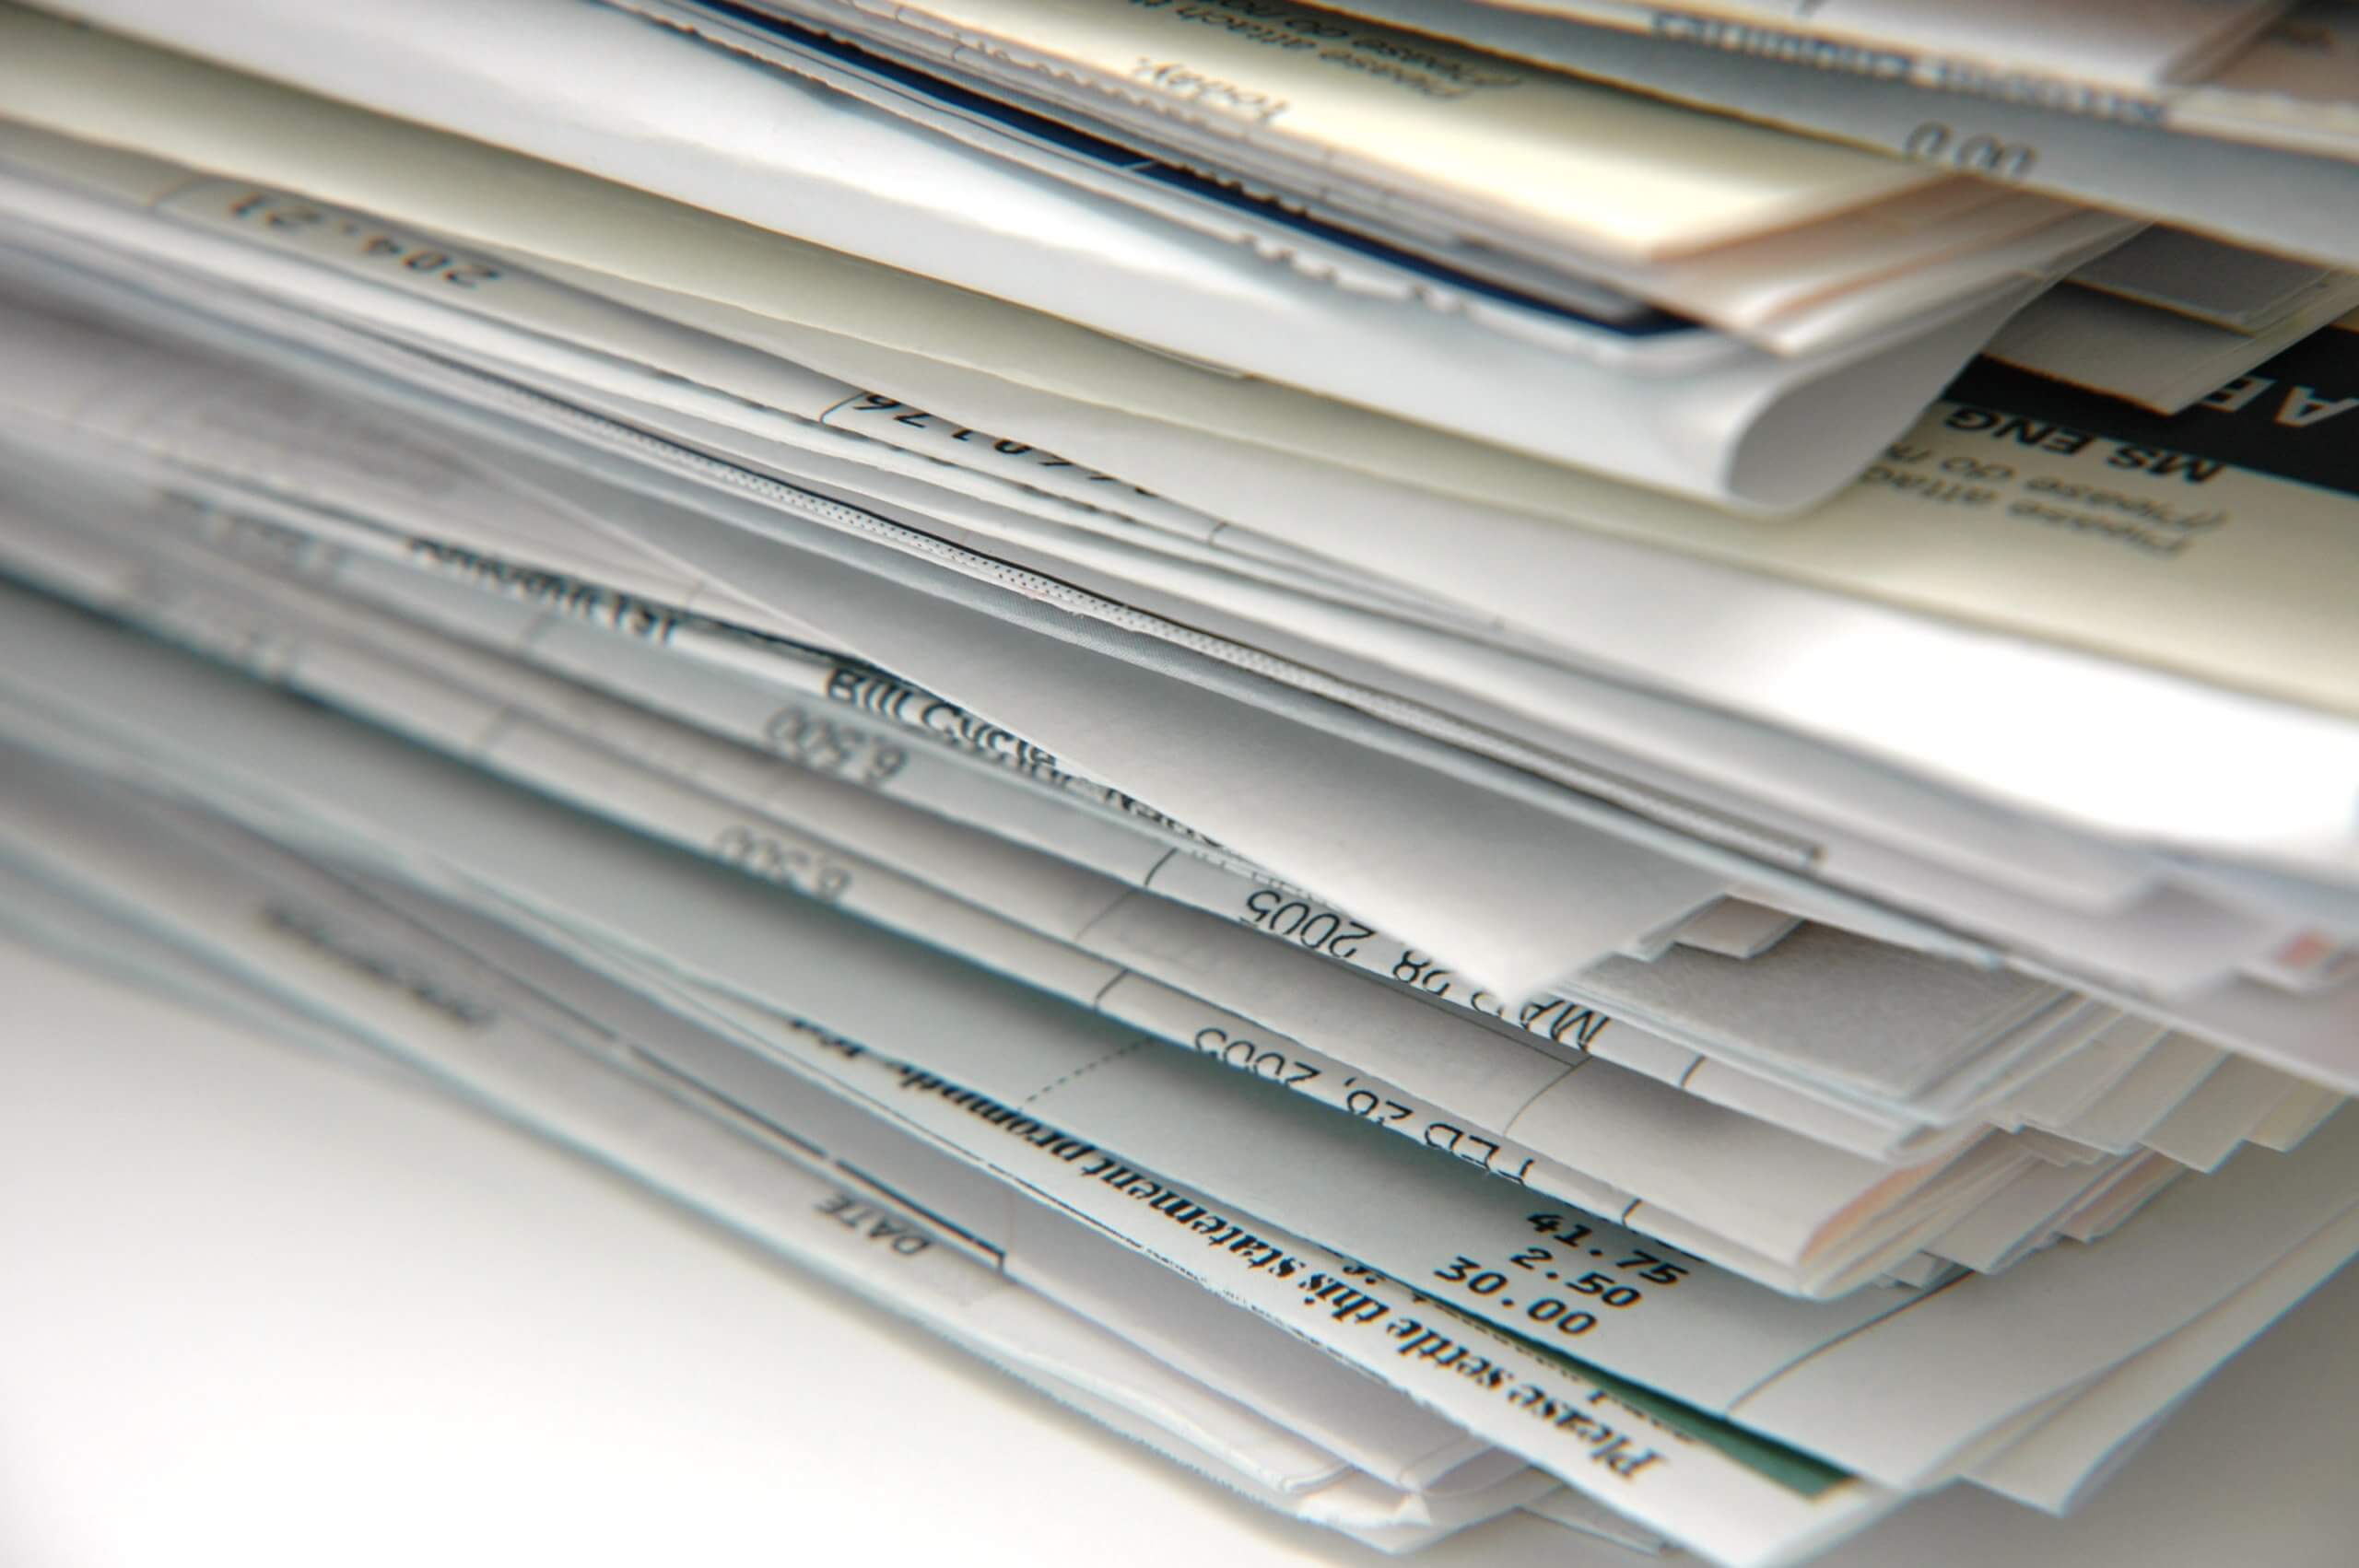 5 Documents to Shred After Tax Season